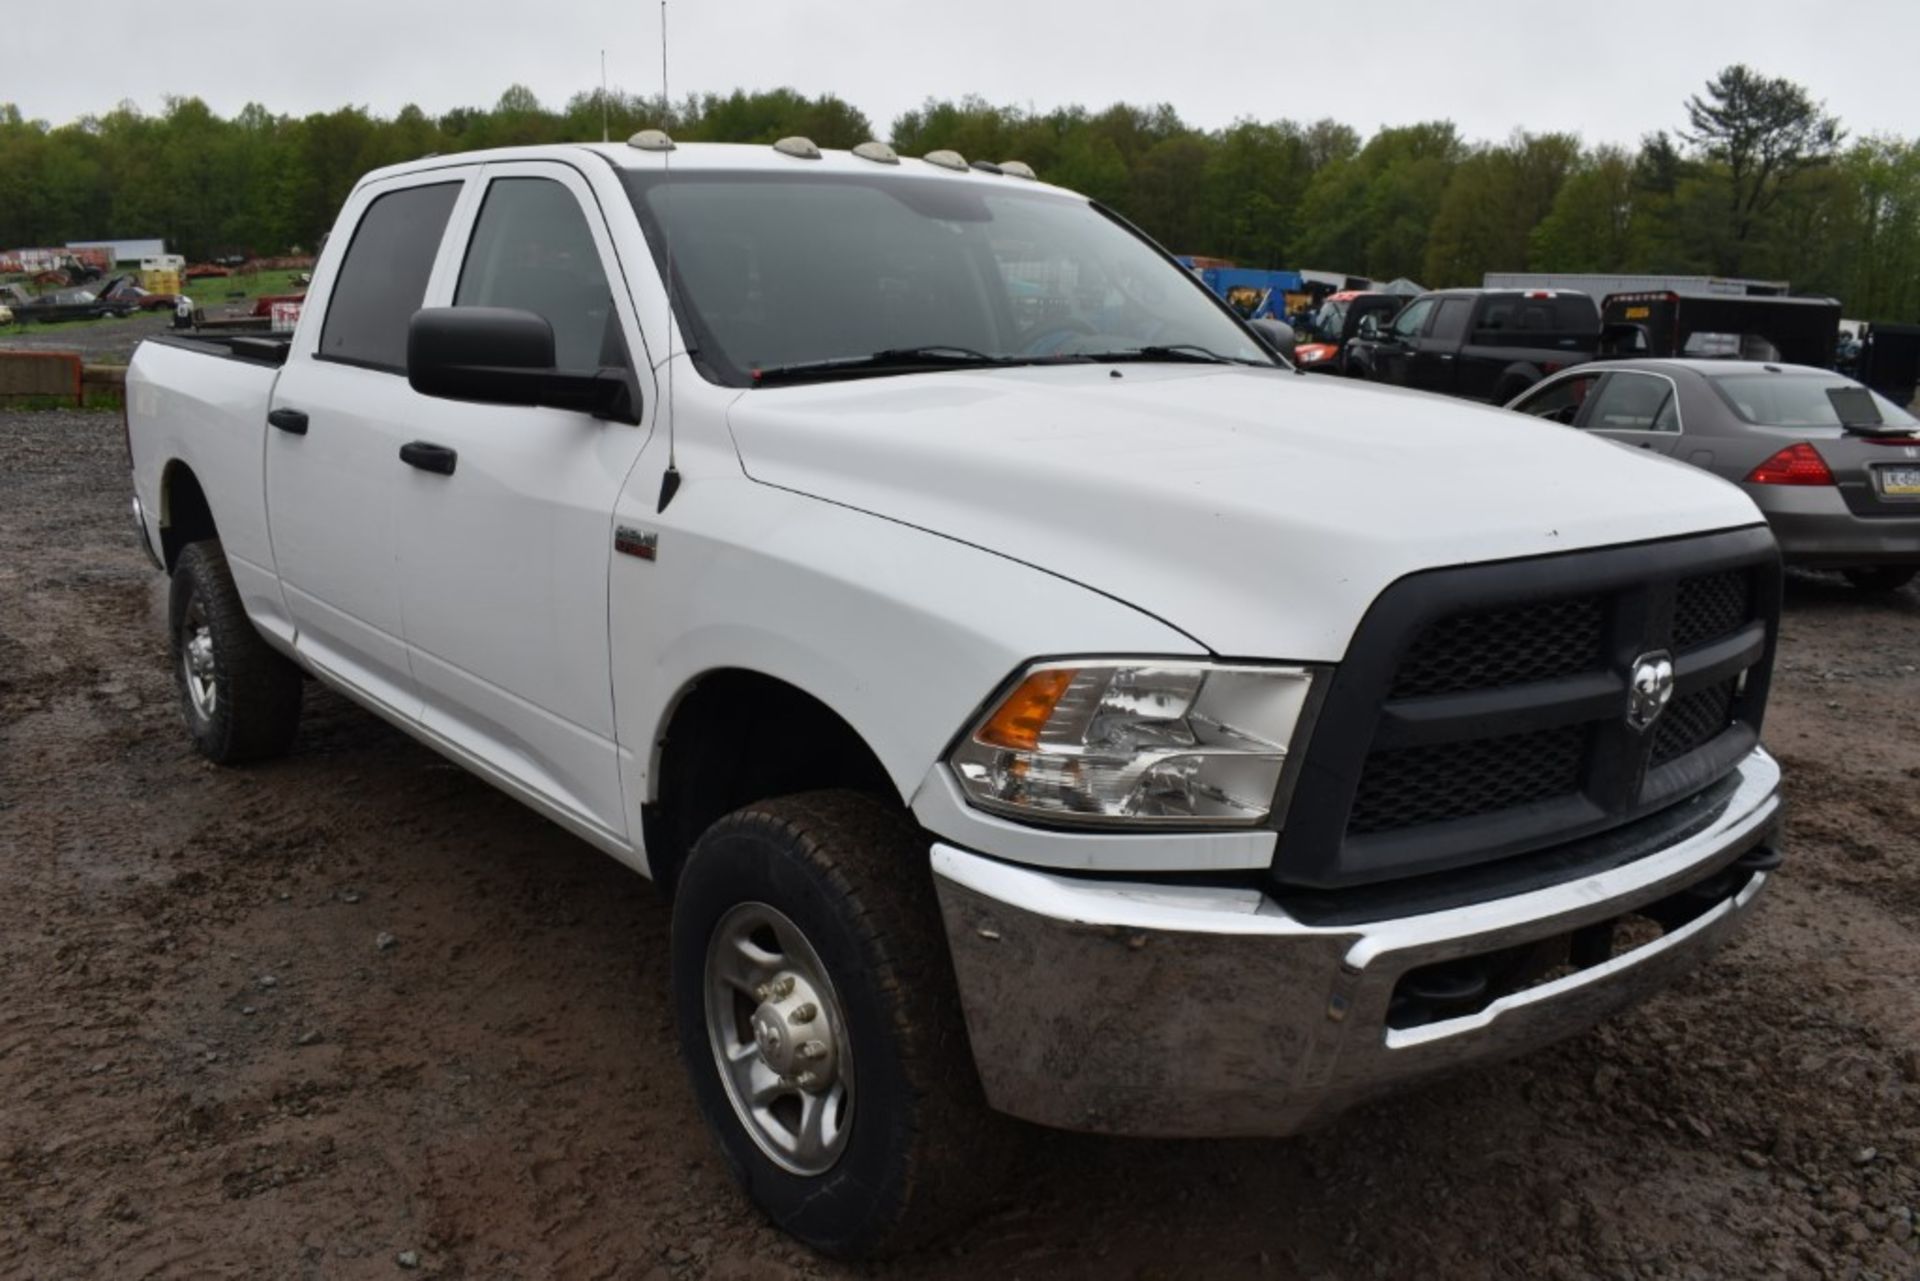 2015 Dodge Ram 2500 Truck With Title, 181238 Miles, Runs and Drives, Hemi 5.7 Gas Engine, Automatic, - Image 3 of 23